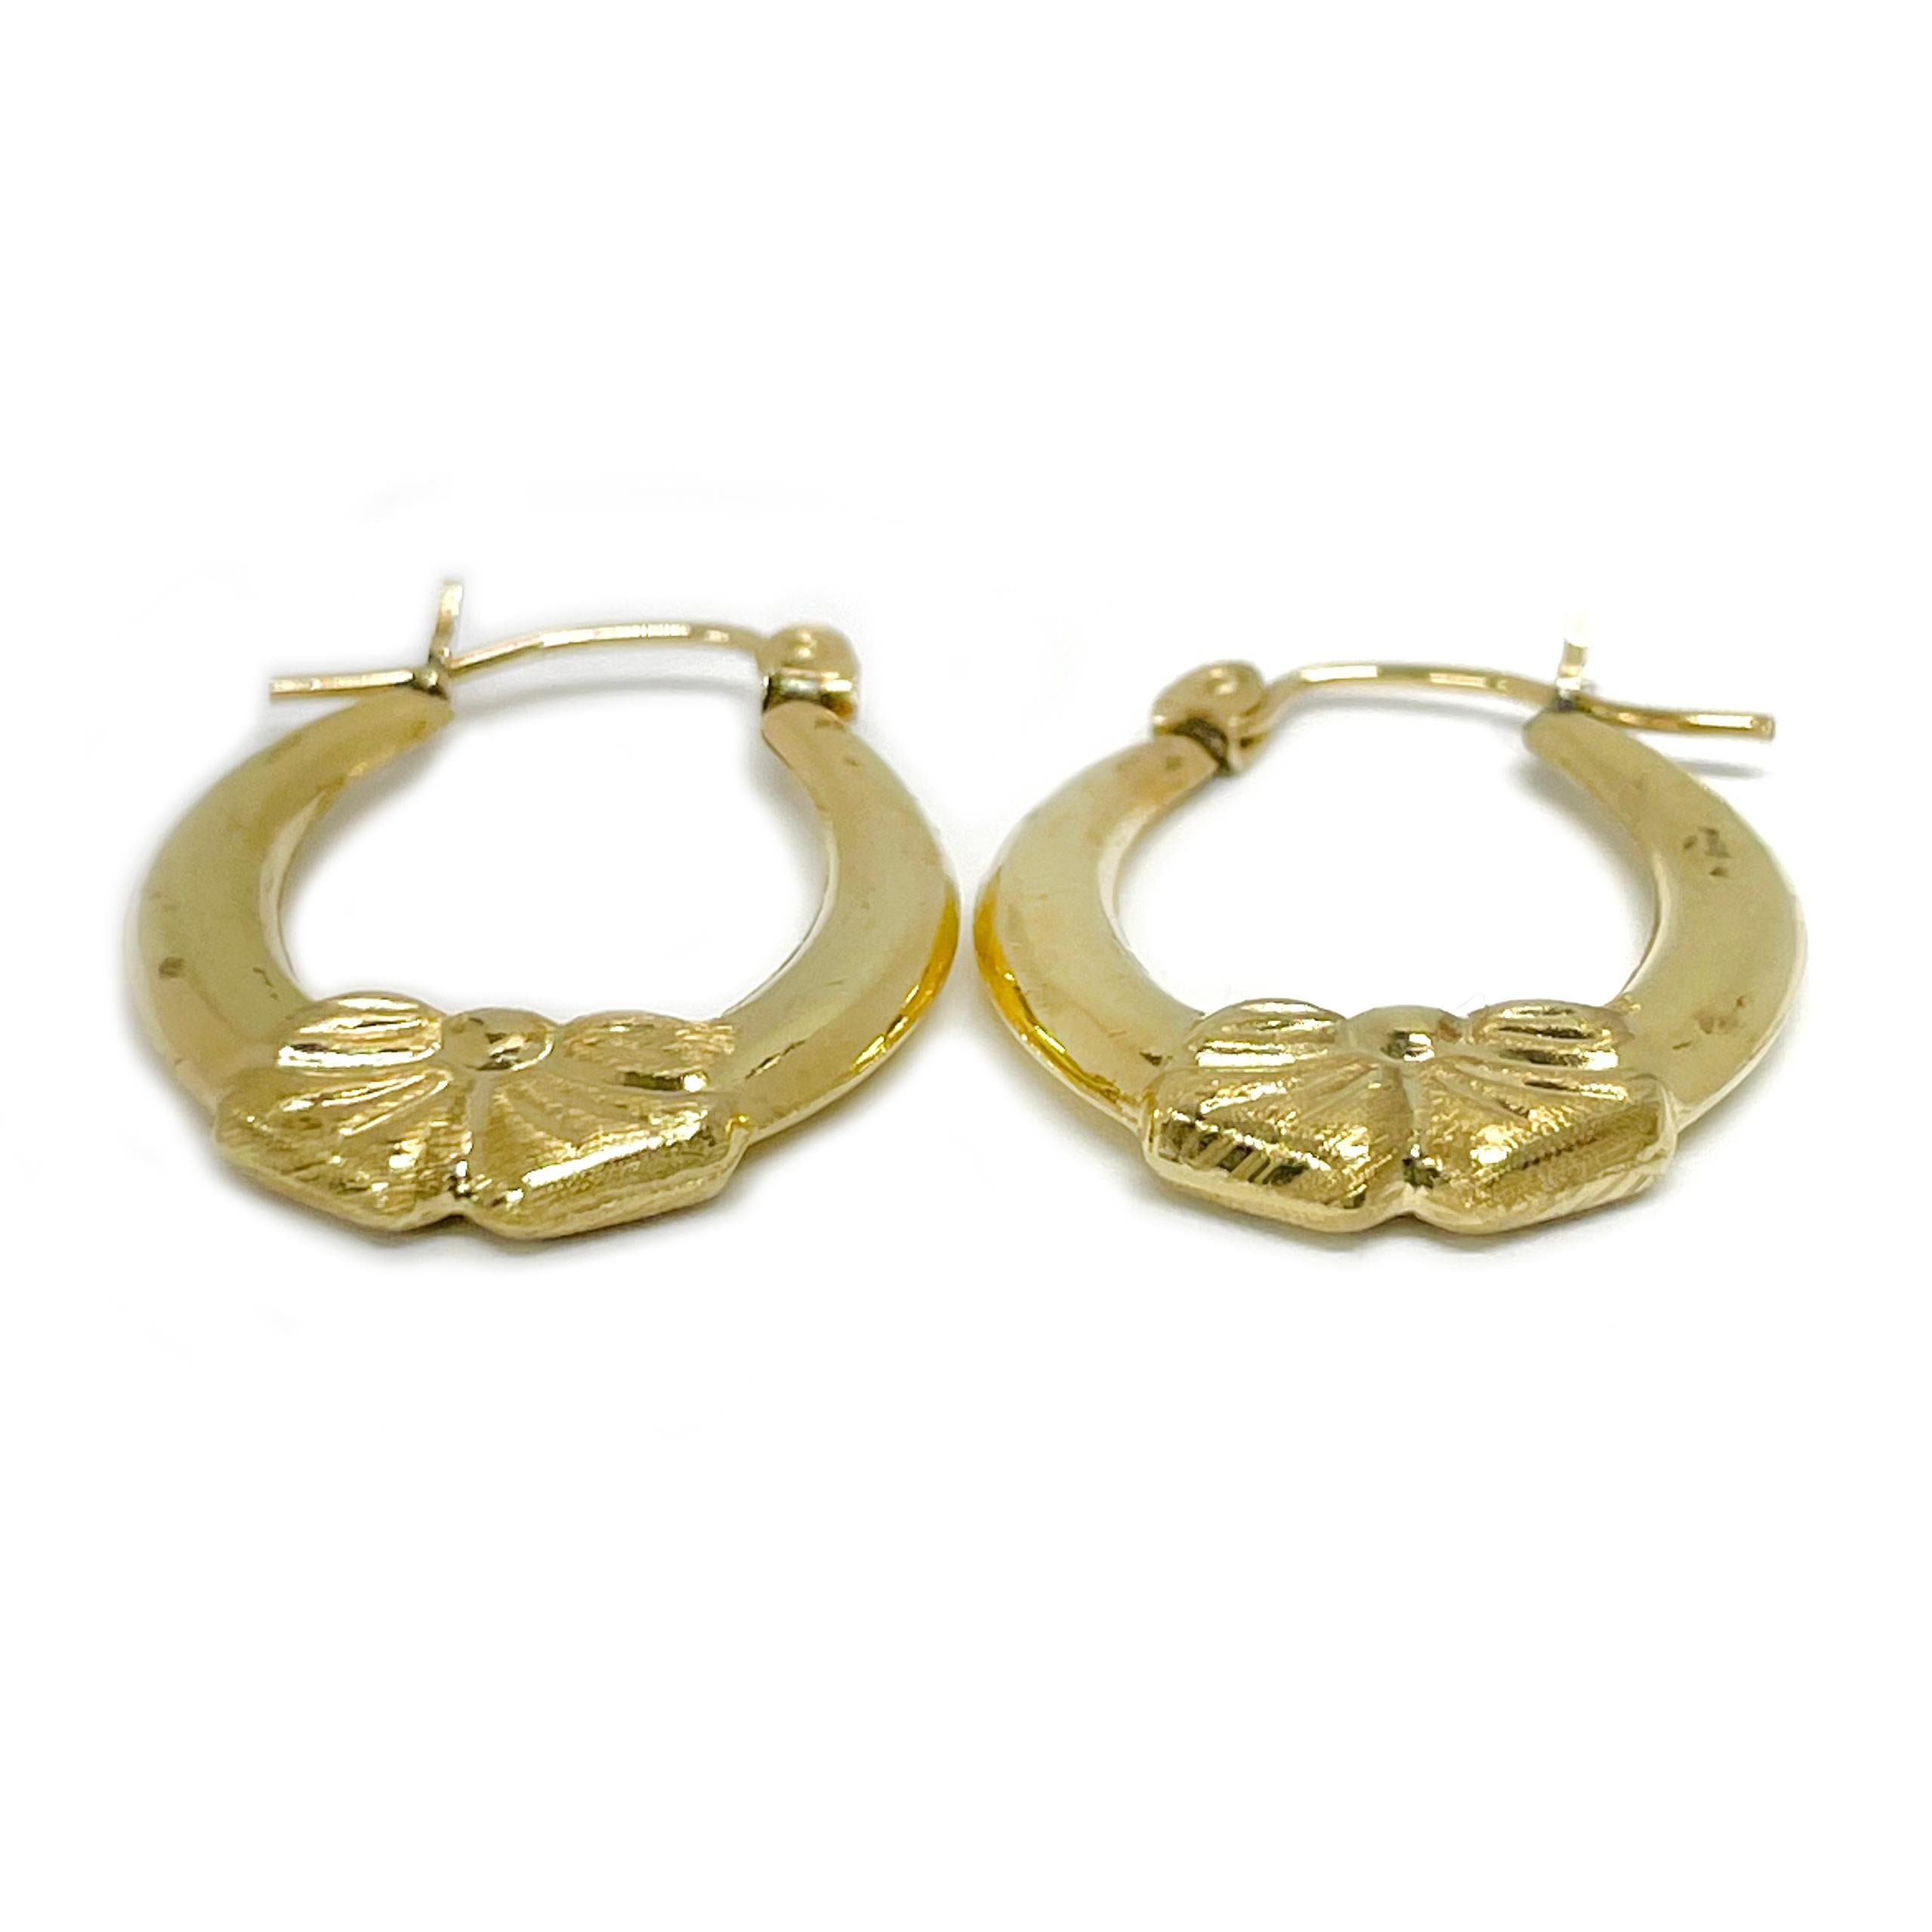 14 Karat Yellow Gold Bow Hoop Earrings. These lightweight hollow hoops feature a textured bow detail at the bottom of the hoop with an overall smooth shiny finish. The earrings measure 23mm high x 18.6mm wide. The earrings have a hoop wire closure